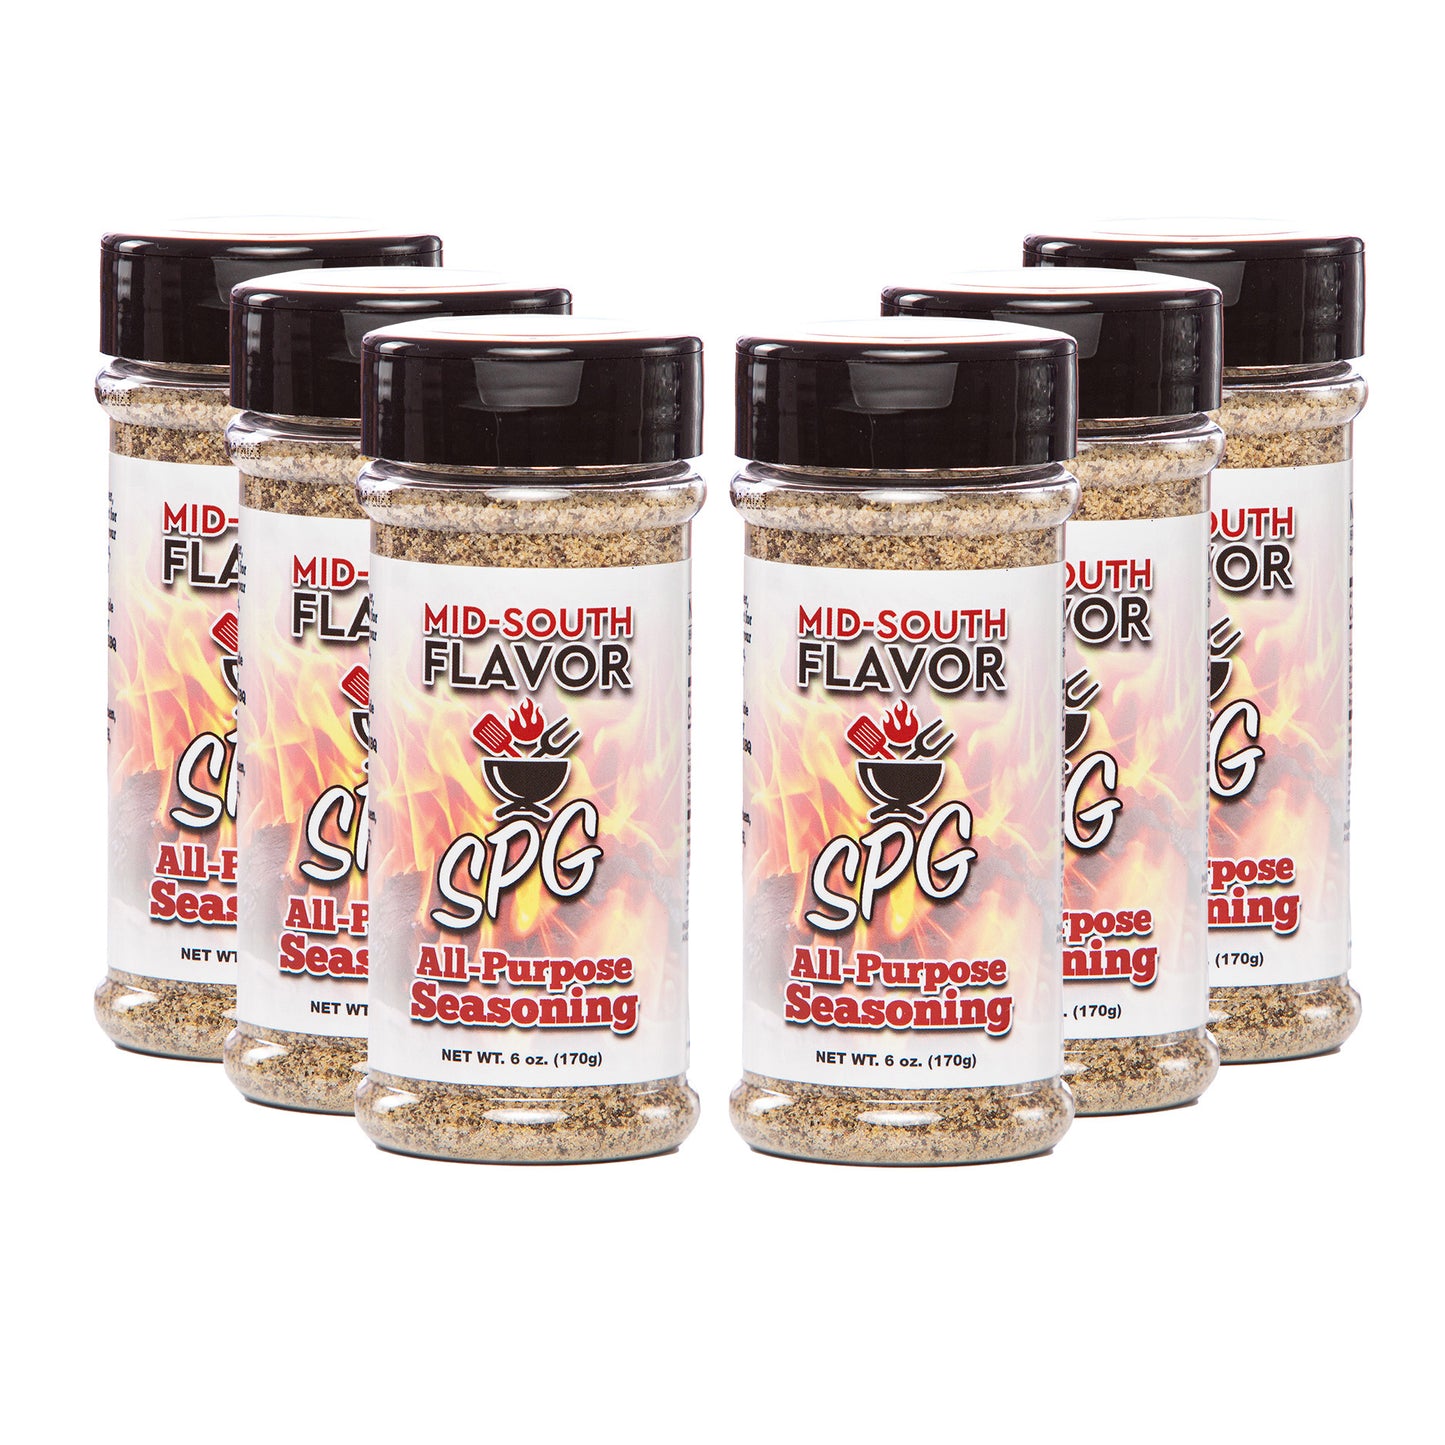 MID-SOUTH FLAVOR SPG All-Purpose Seasoning, 6 oz Bottle of Seasoning for Use Indoor and Outdoor Grilling